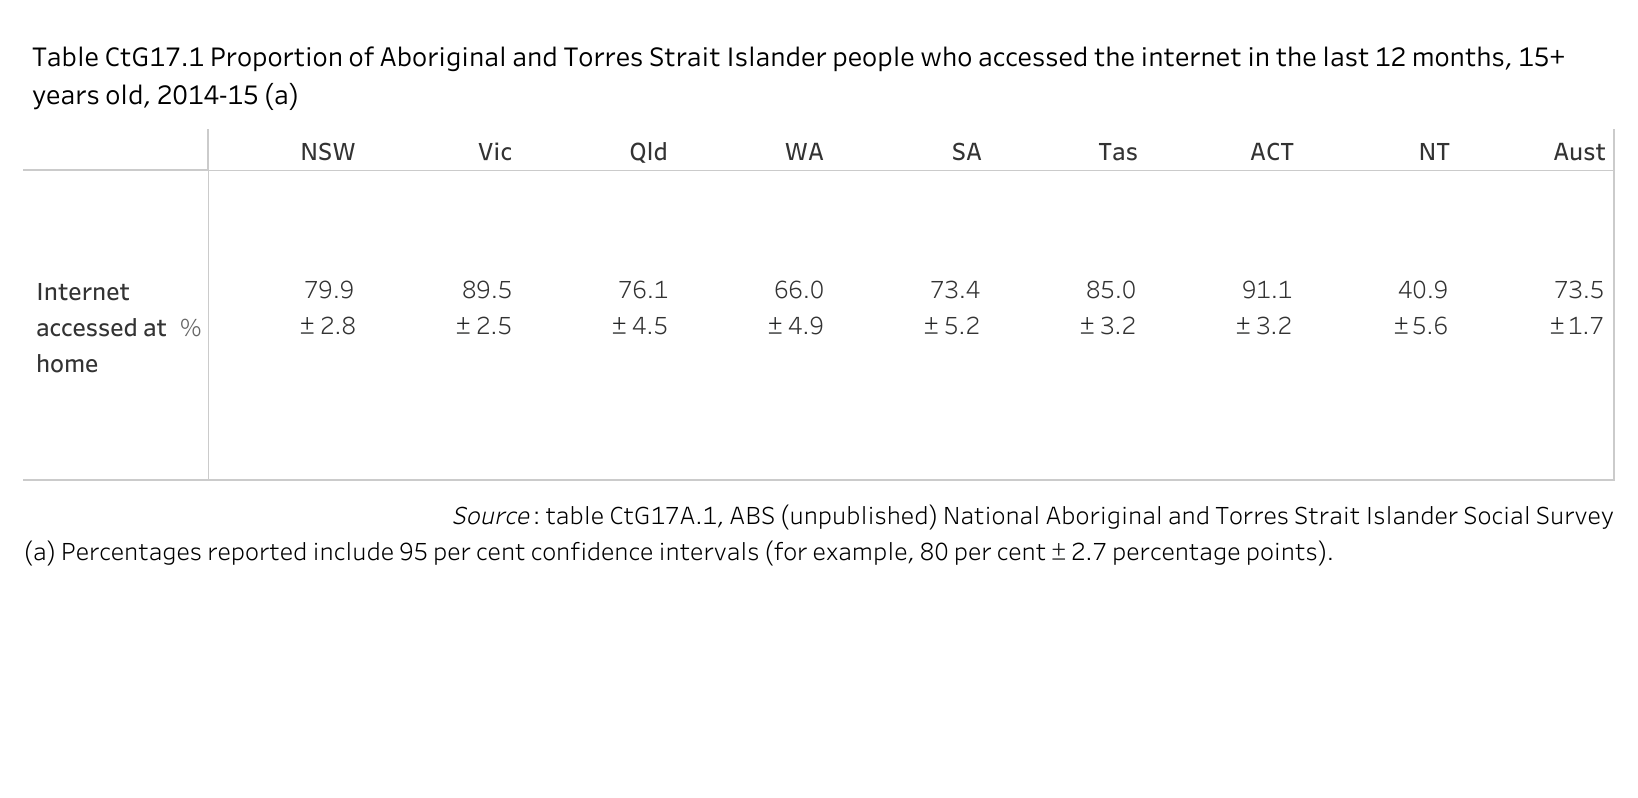 Table CtG17.1 shows the proportion of Aboriginal and Torres Strait Islander people who accessed the internet in the last 12 months, 15+ years old, 2014-15. More details can be found within the text near this image.